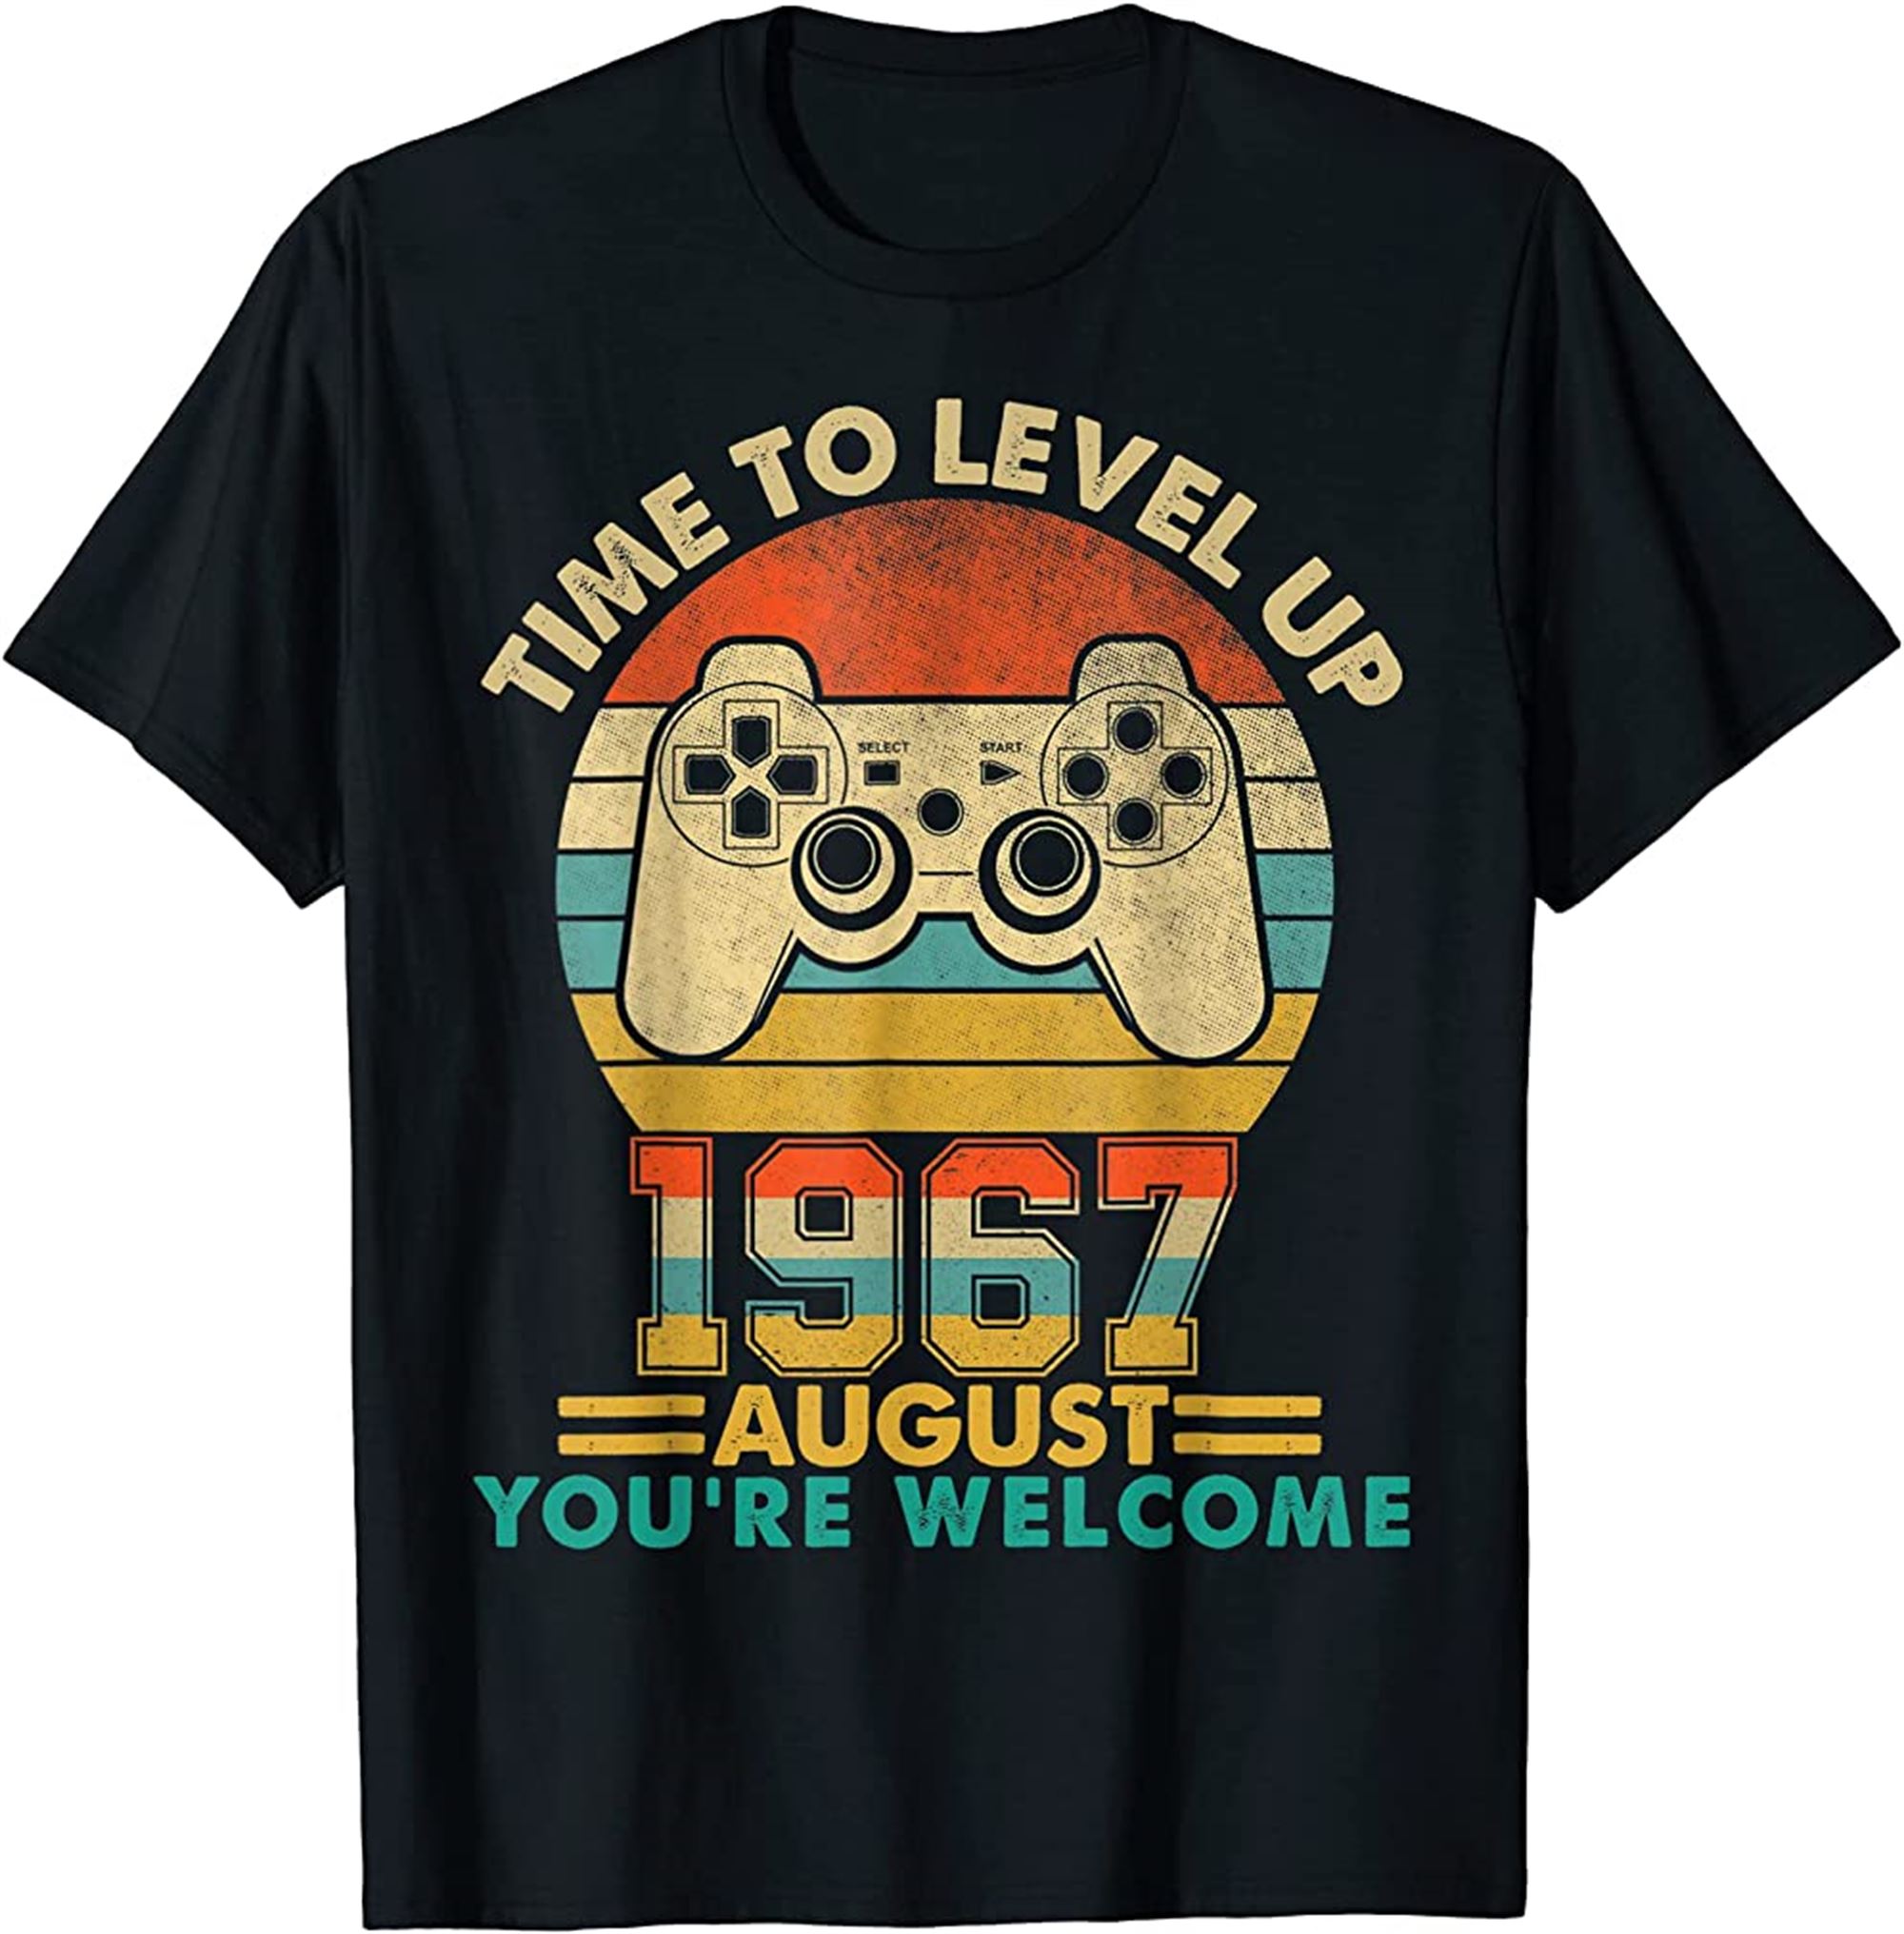 Vintage 1967 August 55 Years Old Video Gamer 55th Birthday T-shirt Size Up To 5xl